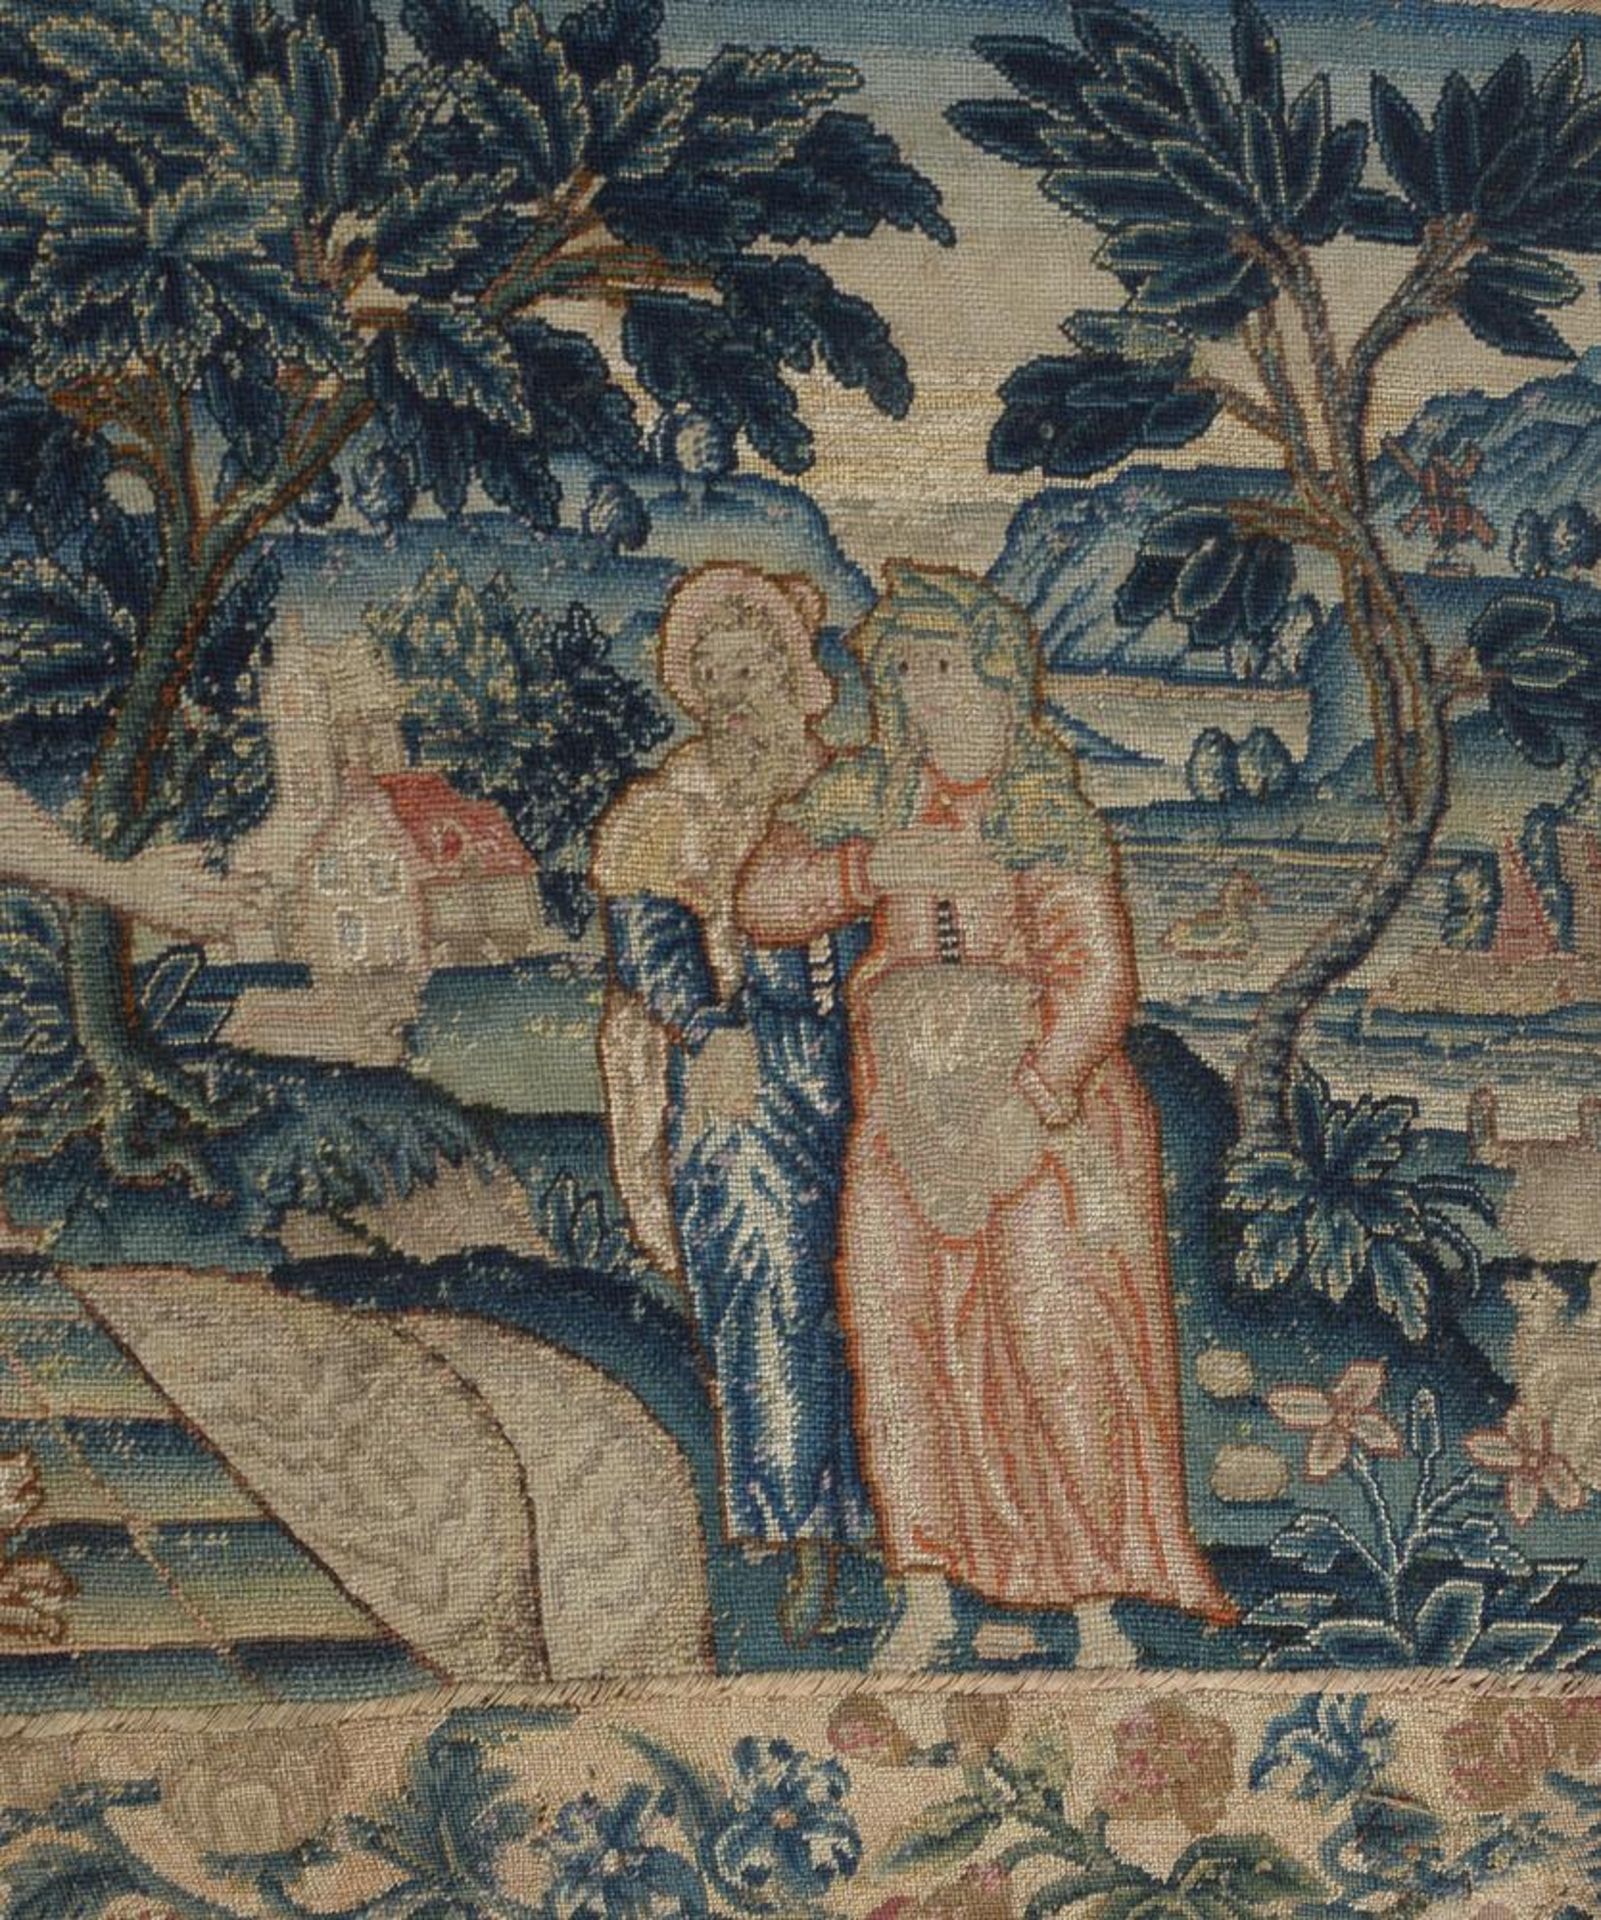 A LONG NEEDLEWORK PANEL DEPICTING STORIES FROM AROUND THE BIRTH OF CHRIST, 17TH CENTURY - Bild 3 aus 5